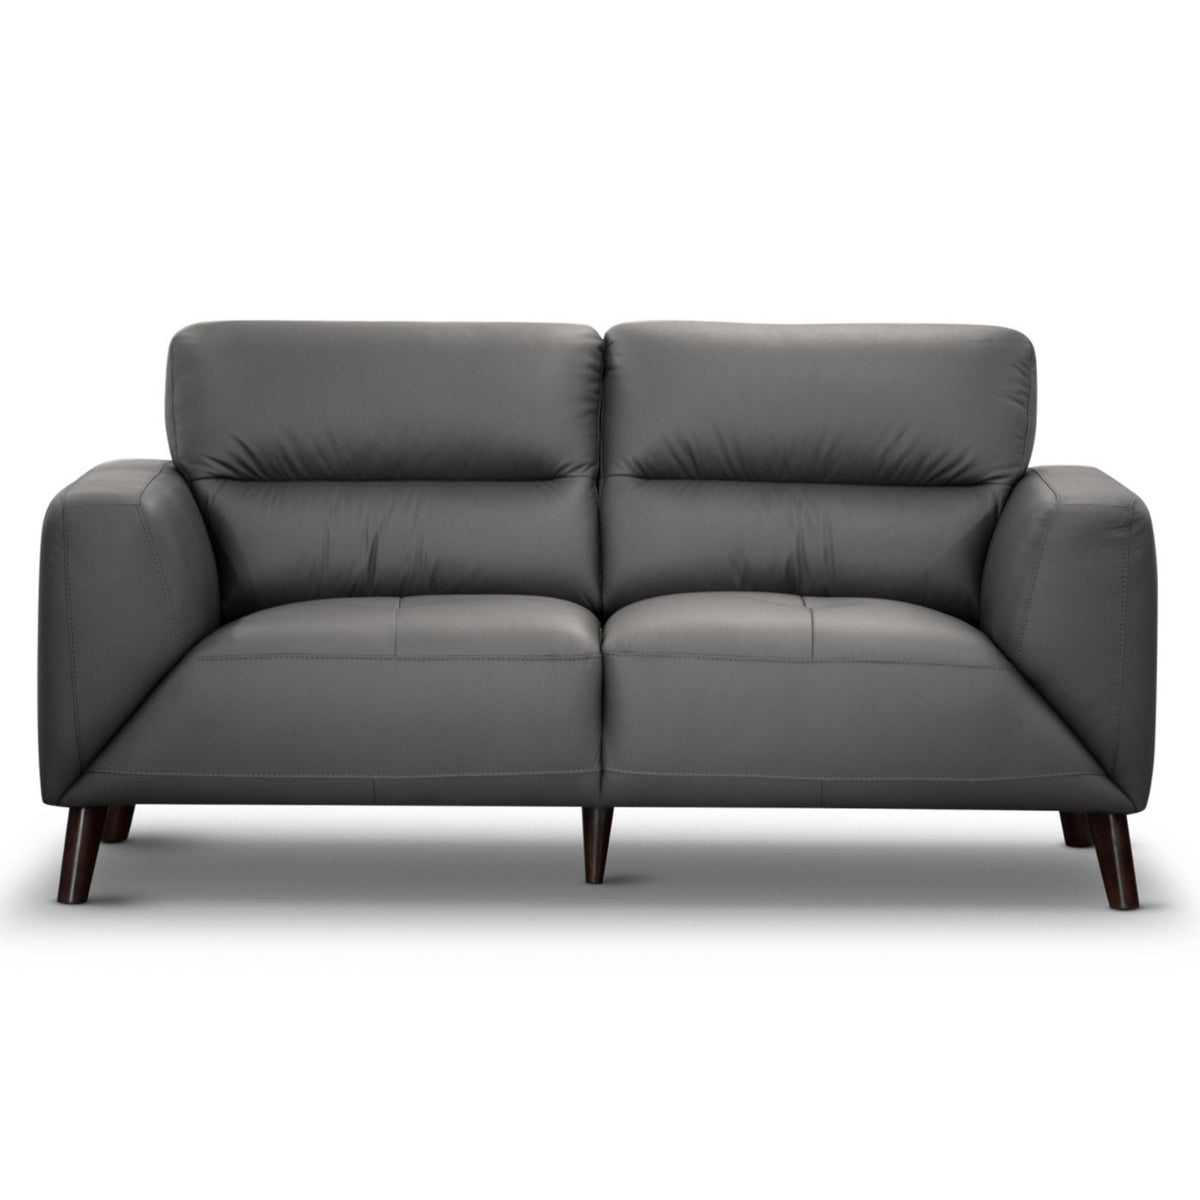 Lenora Genuine Leather Sofa 2 Seater Upholstered Lounge Couch - Gunmetal - Notbrand